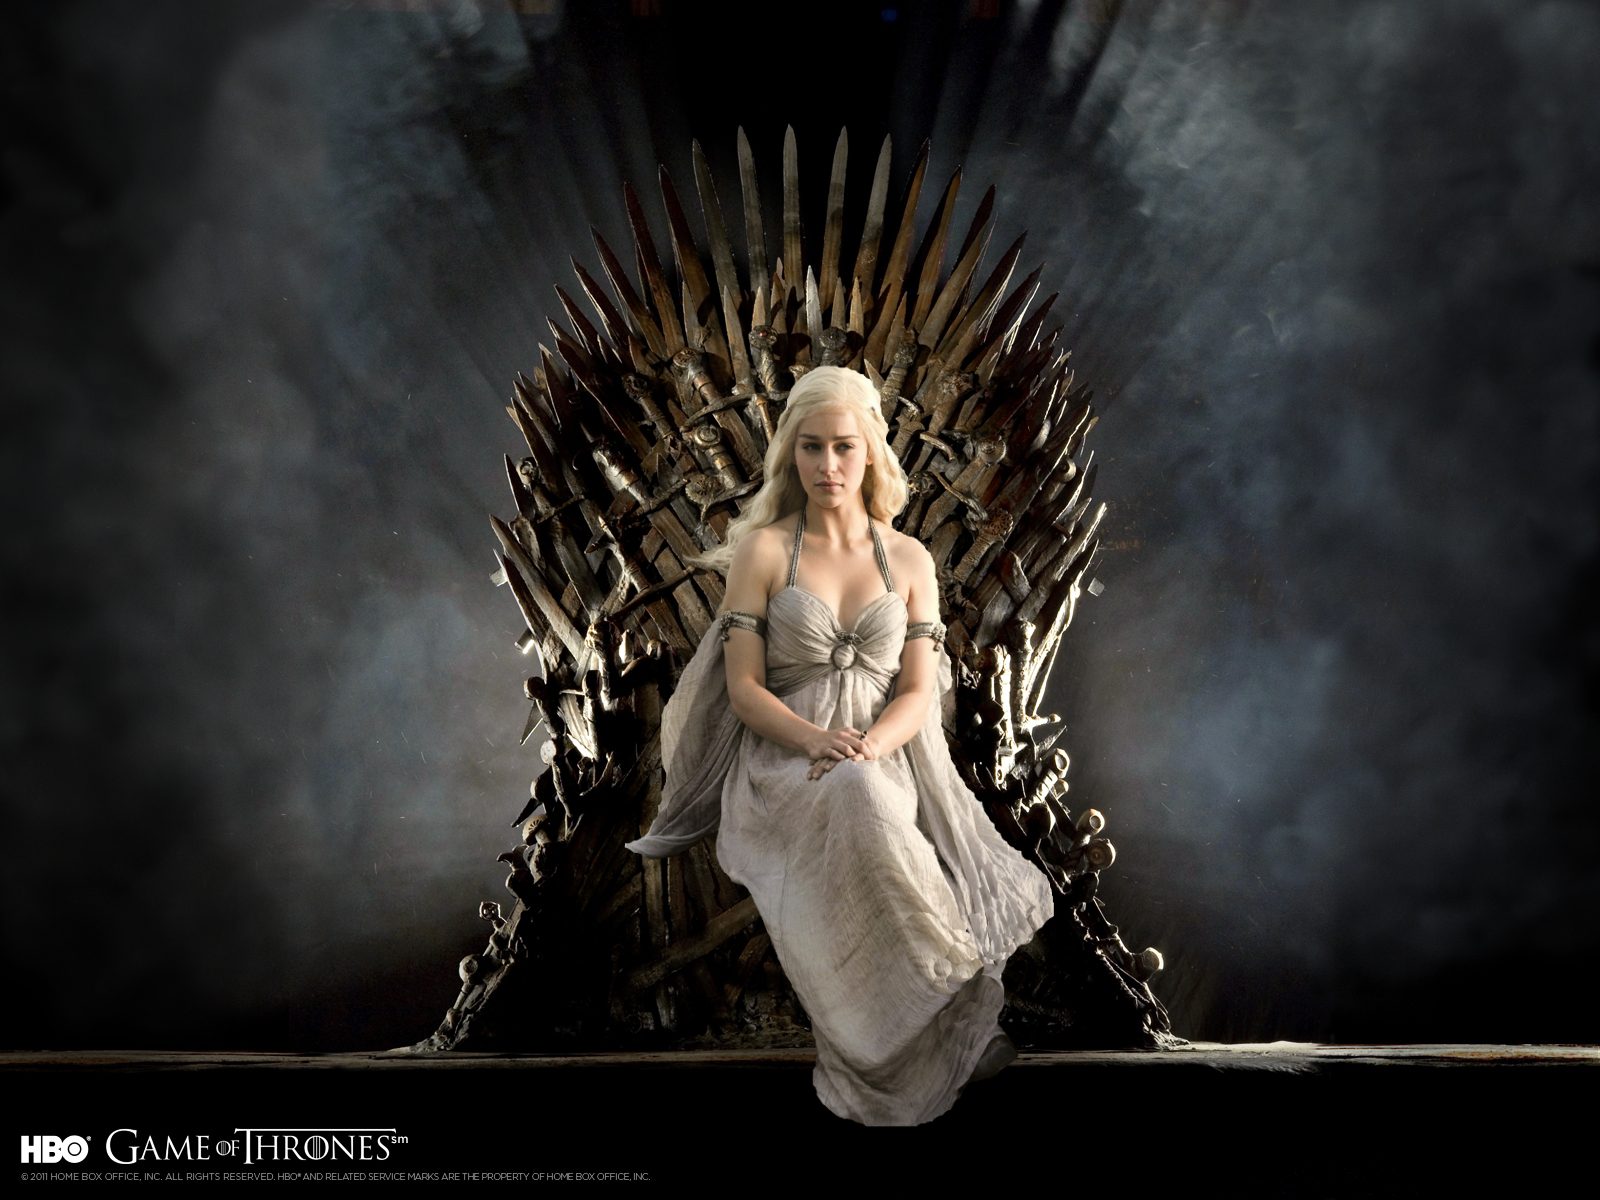 Preview: Indian Premiere of GAME OF THRONES Season 4